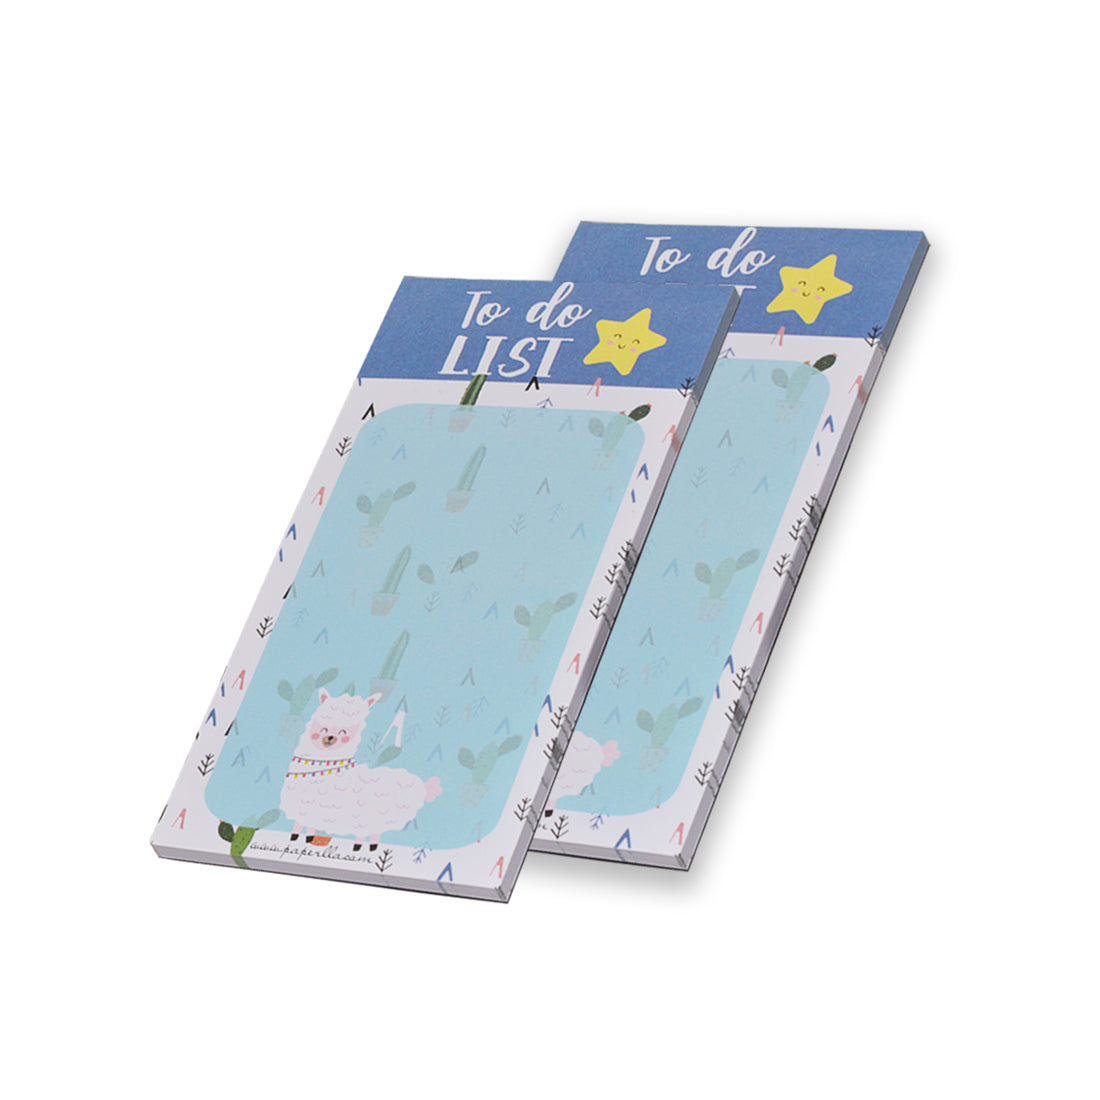 Day Planner Notes Diary, Notepad with to Do List, Schedule, and Habit Tracker - 50 Tear Off Undated Sheets Set of 6